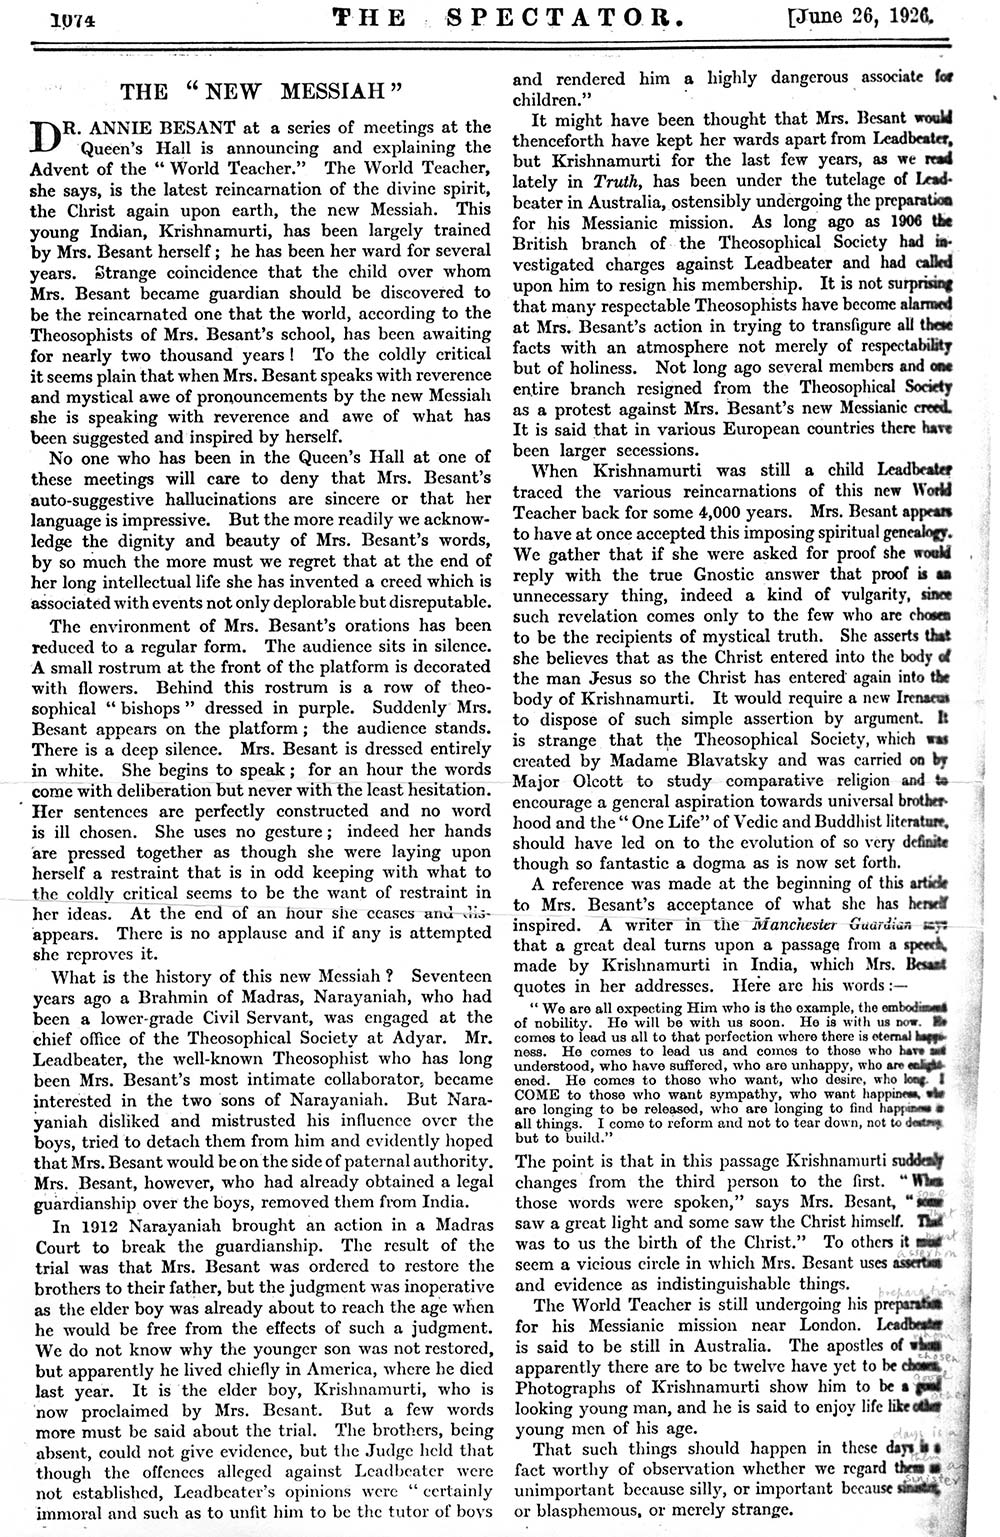 1926 The Spectator - The New Messiah